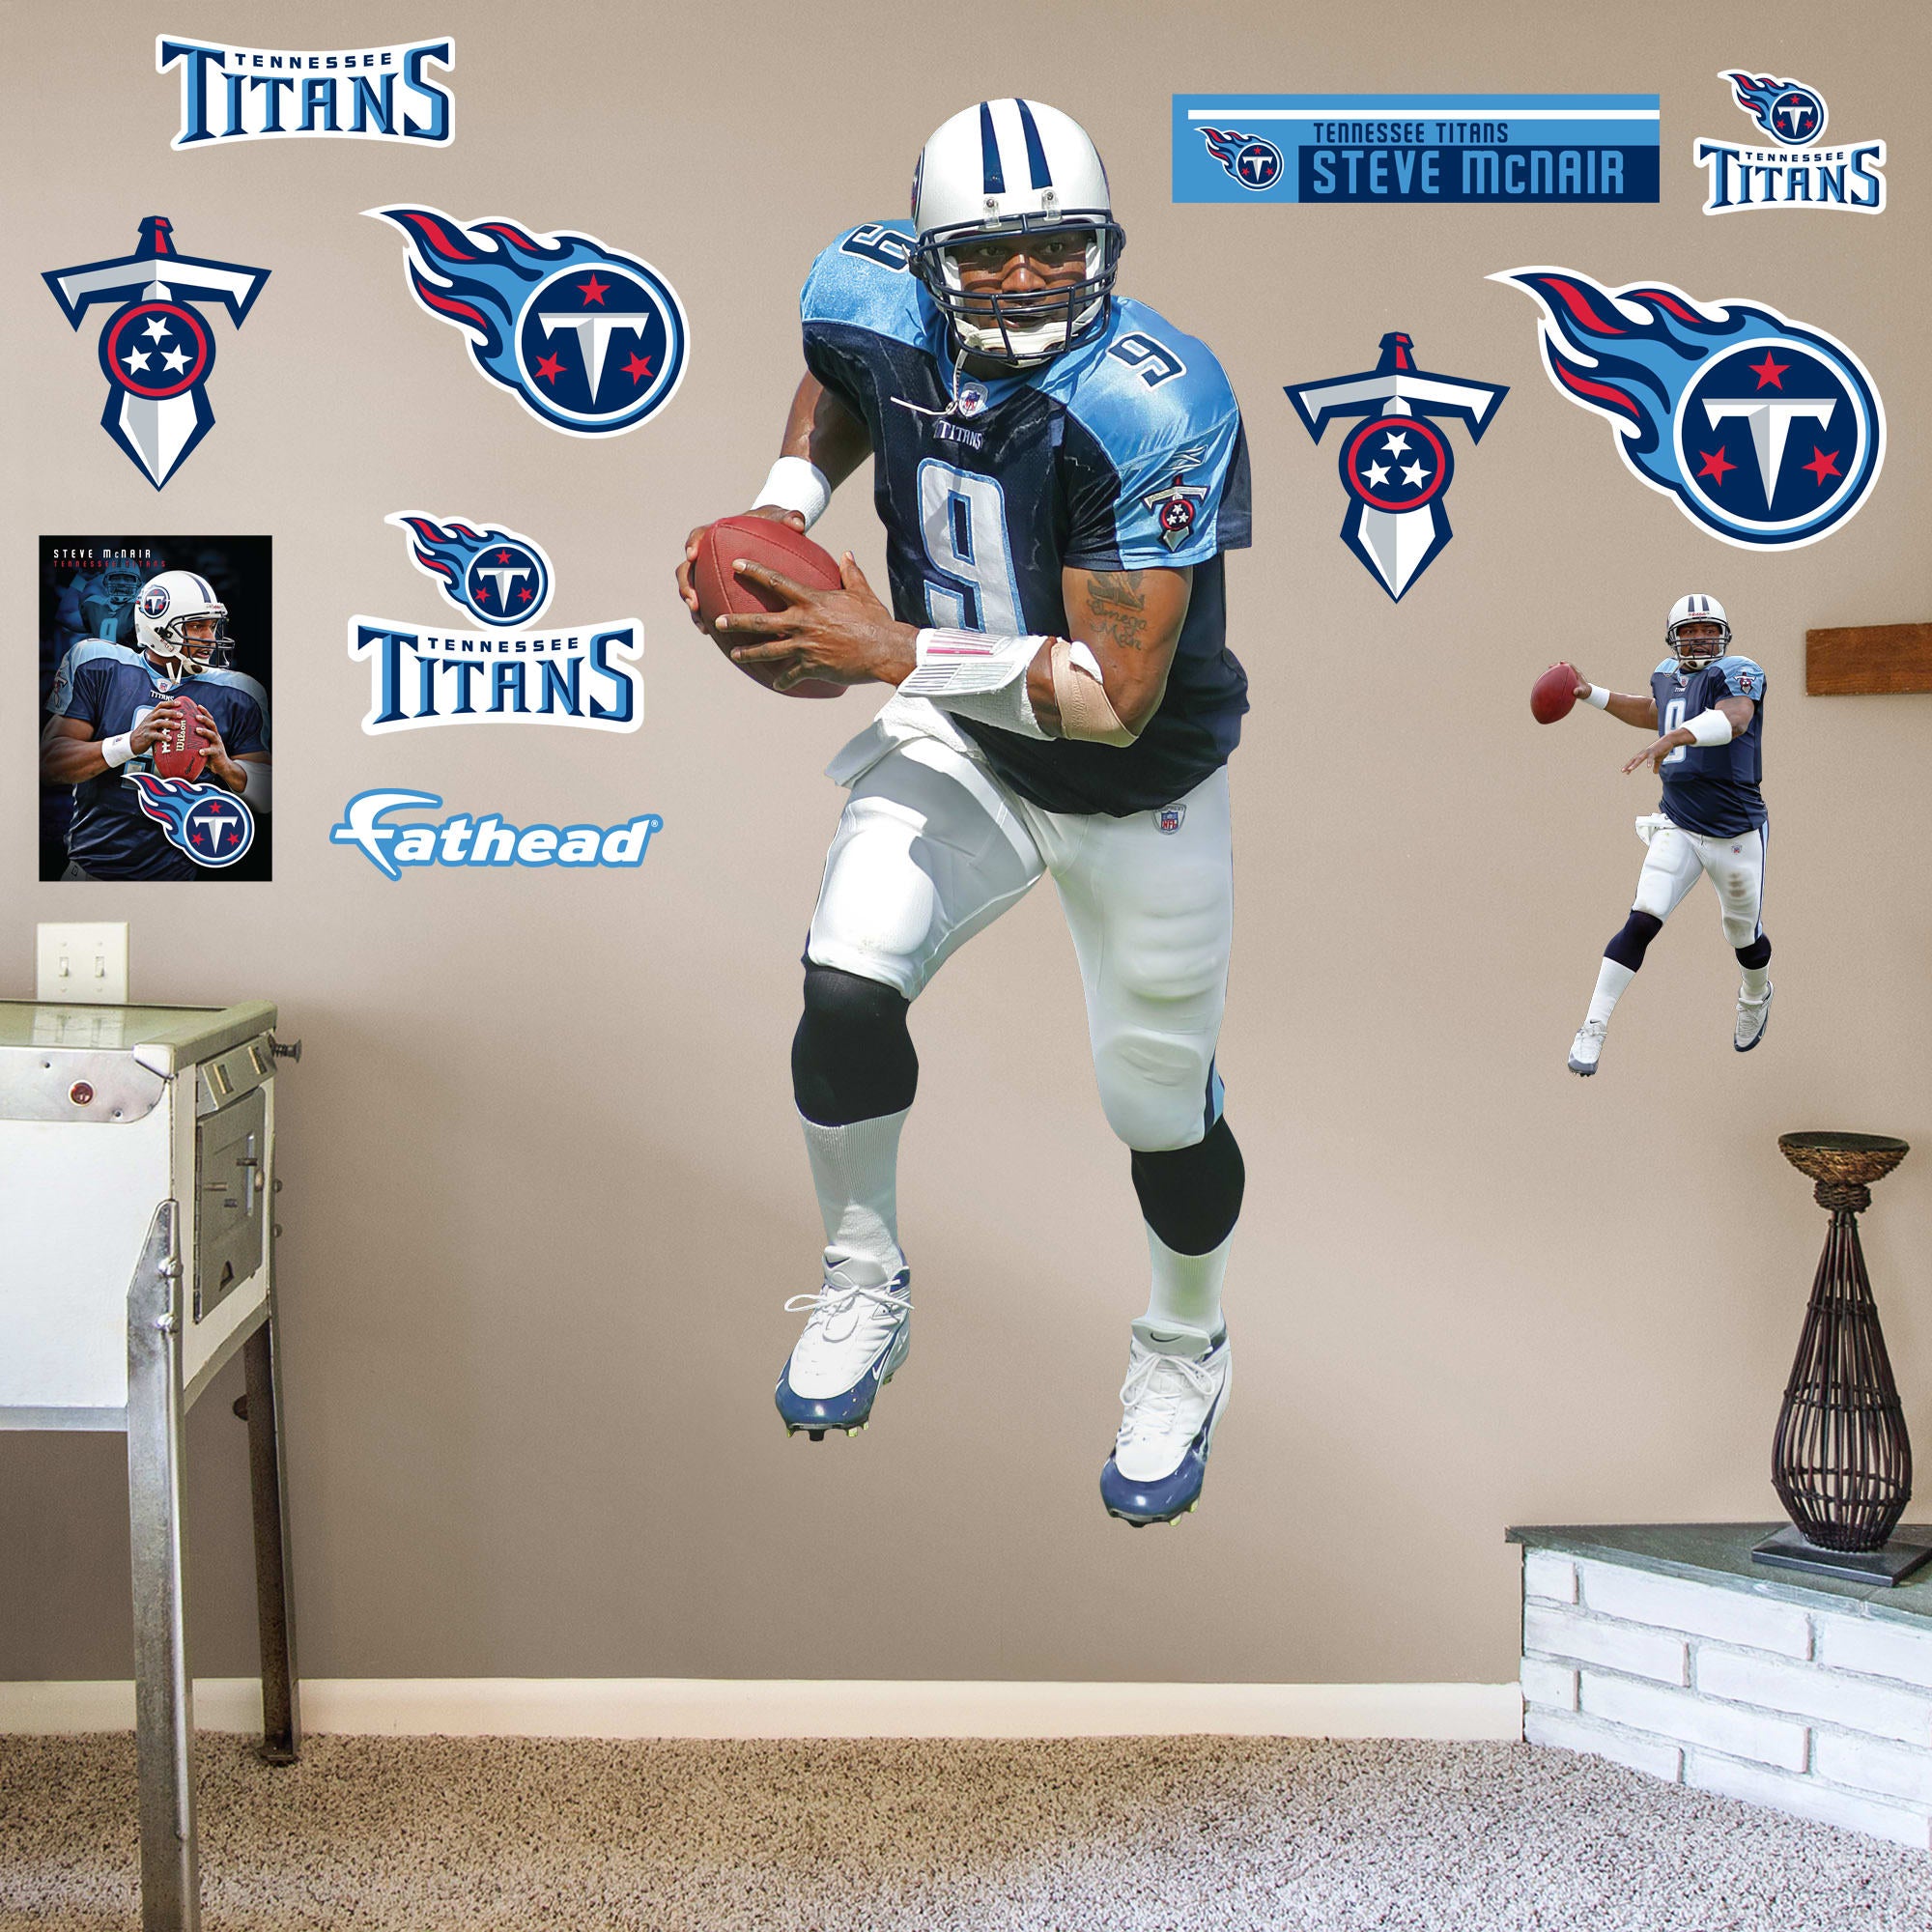 Steve McNair for Tennessee Titans: Titans Legend - Officially Licensed NFL Removable Wall Decal Life-Size Athlete + 11 Decals (5